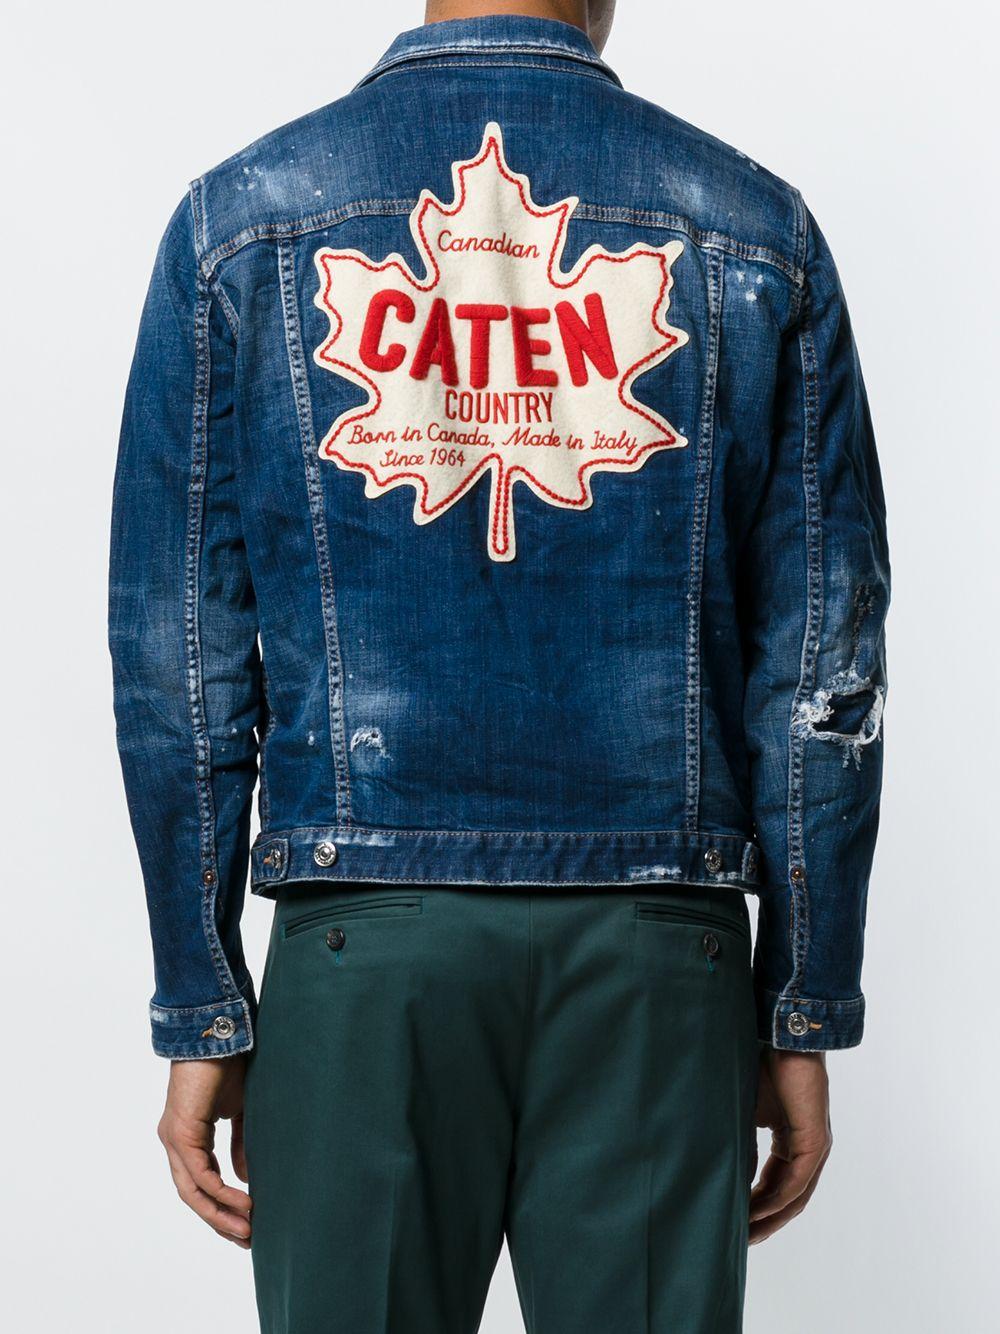 DSquared² Distressed Patch Denim Jacket in Blue for Men - Lyst